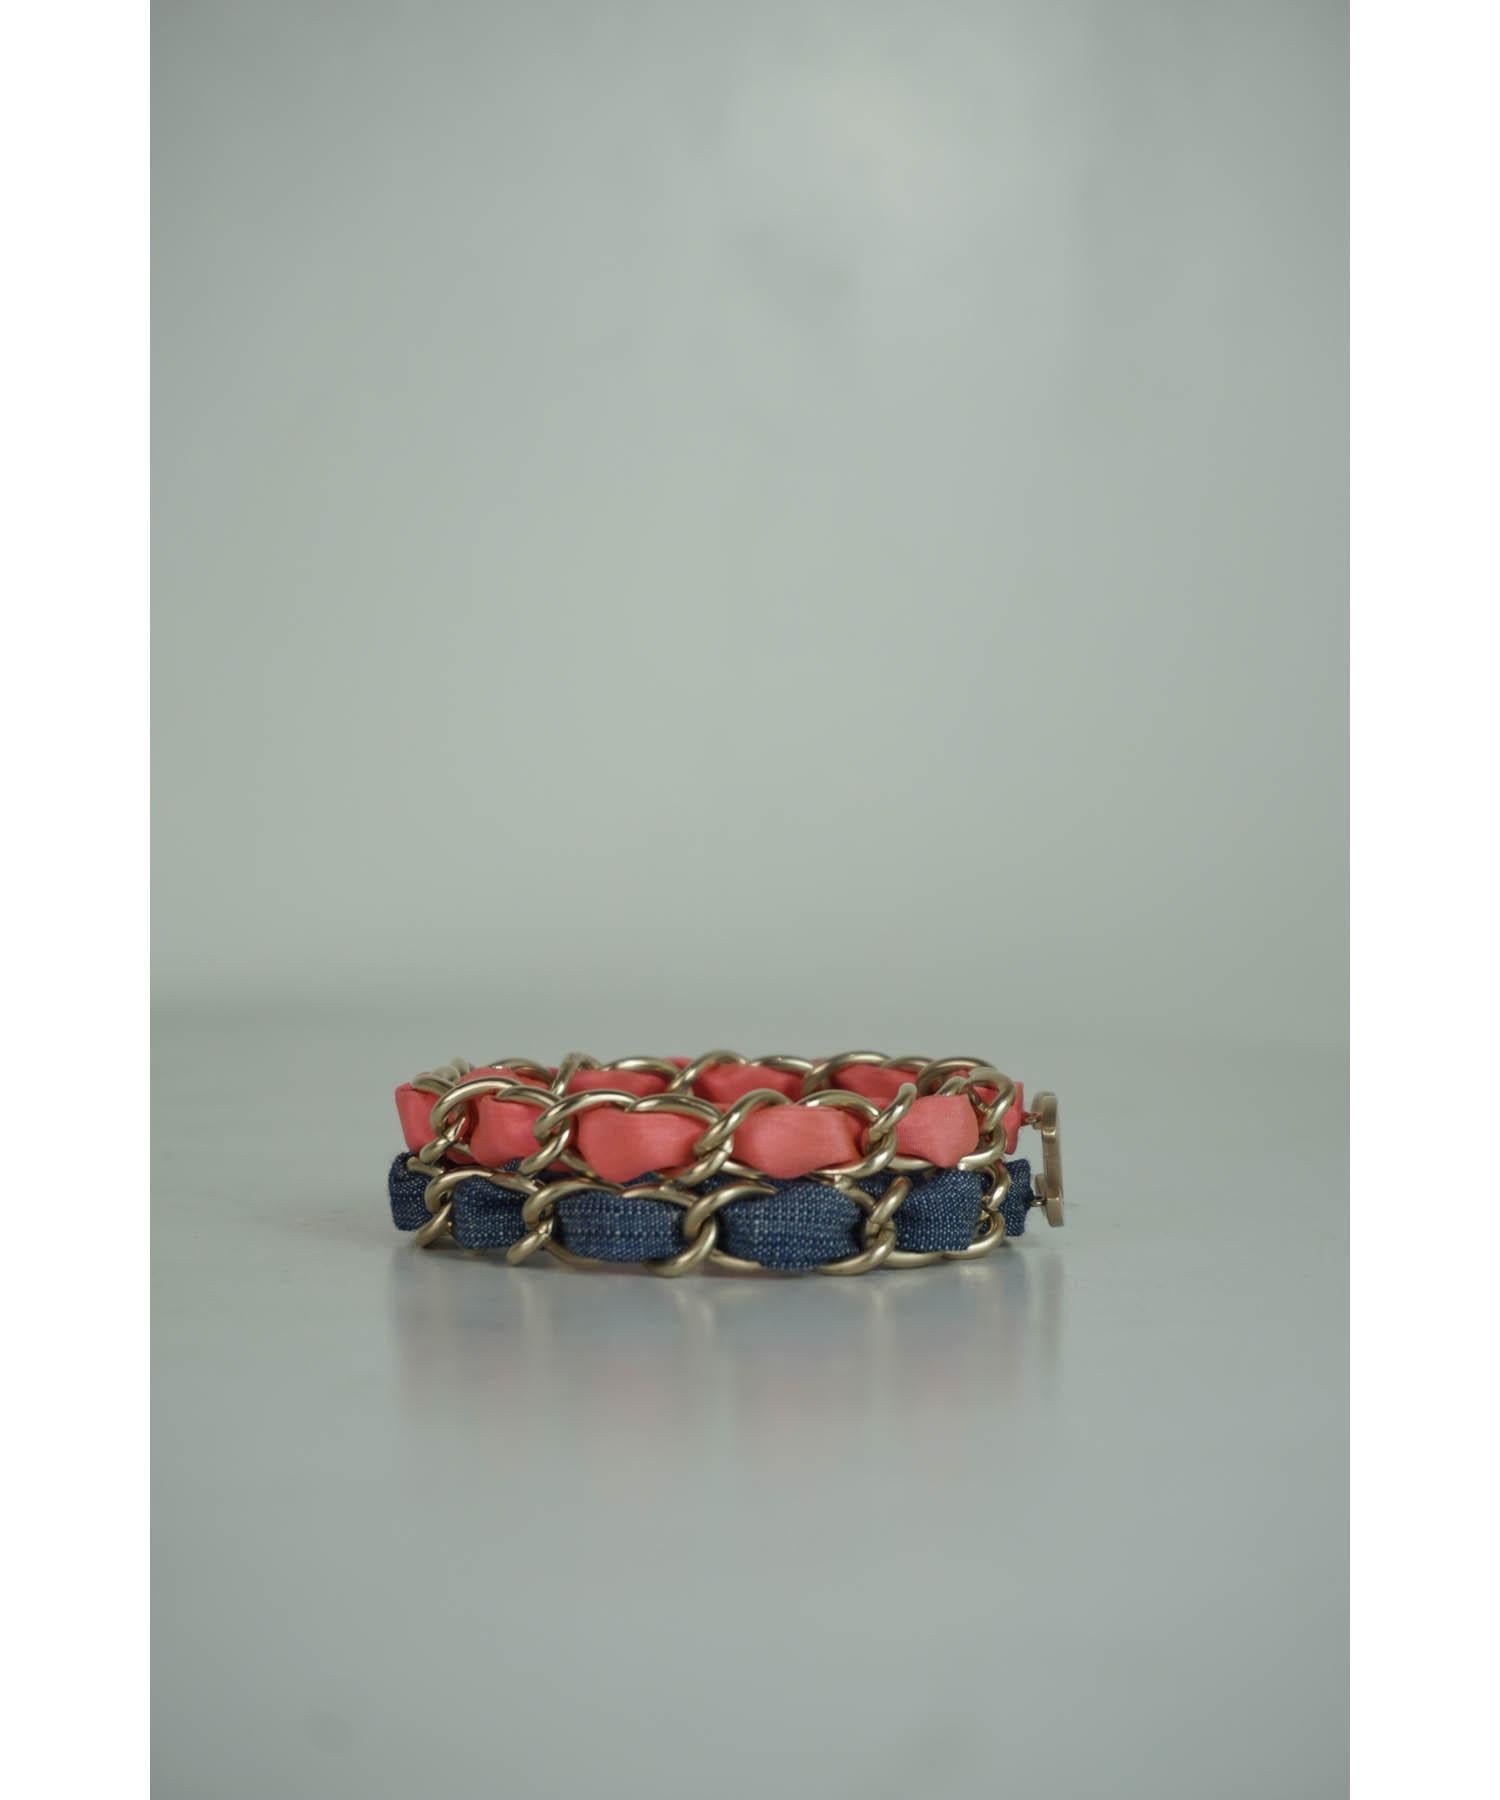 Chanel Denim / Pink Chain CC Bracelet 2009 In Excellent Condition For Sale In Carmel, CA